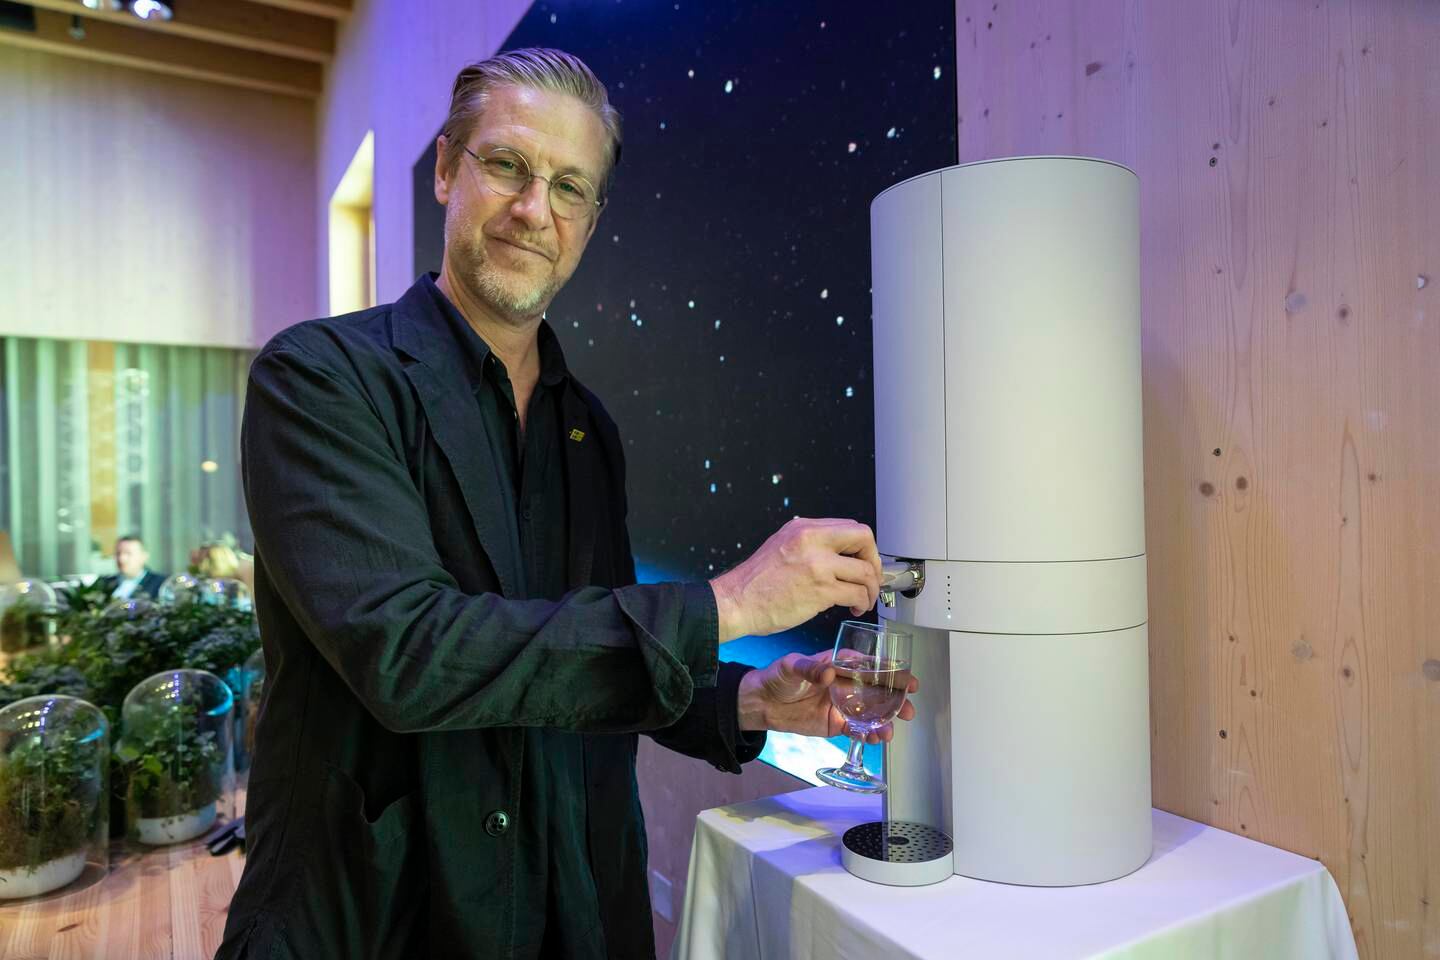 Martin Renck, co-founder and creative director at Wayout International, demonstrates his company's smart tap system at Expo 2020 which provides safe drinking water from treated sources, including sea water. Photo: Antonie Robertson / The National